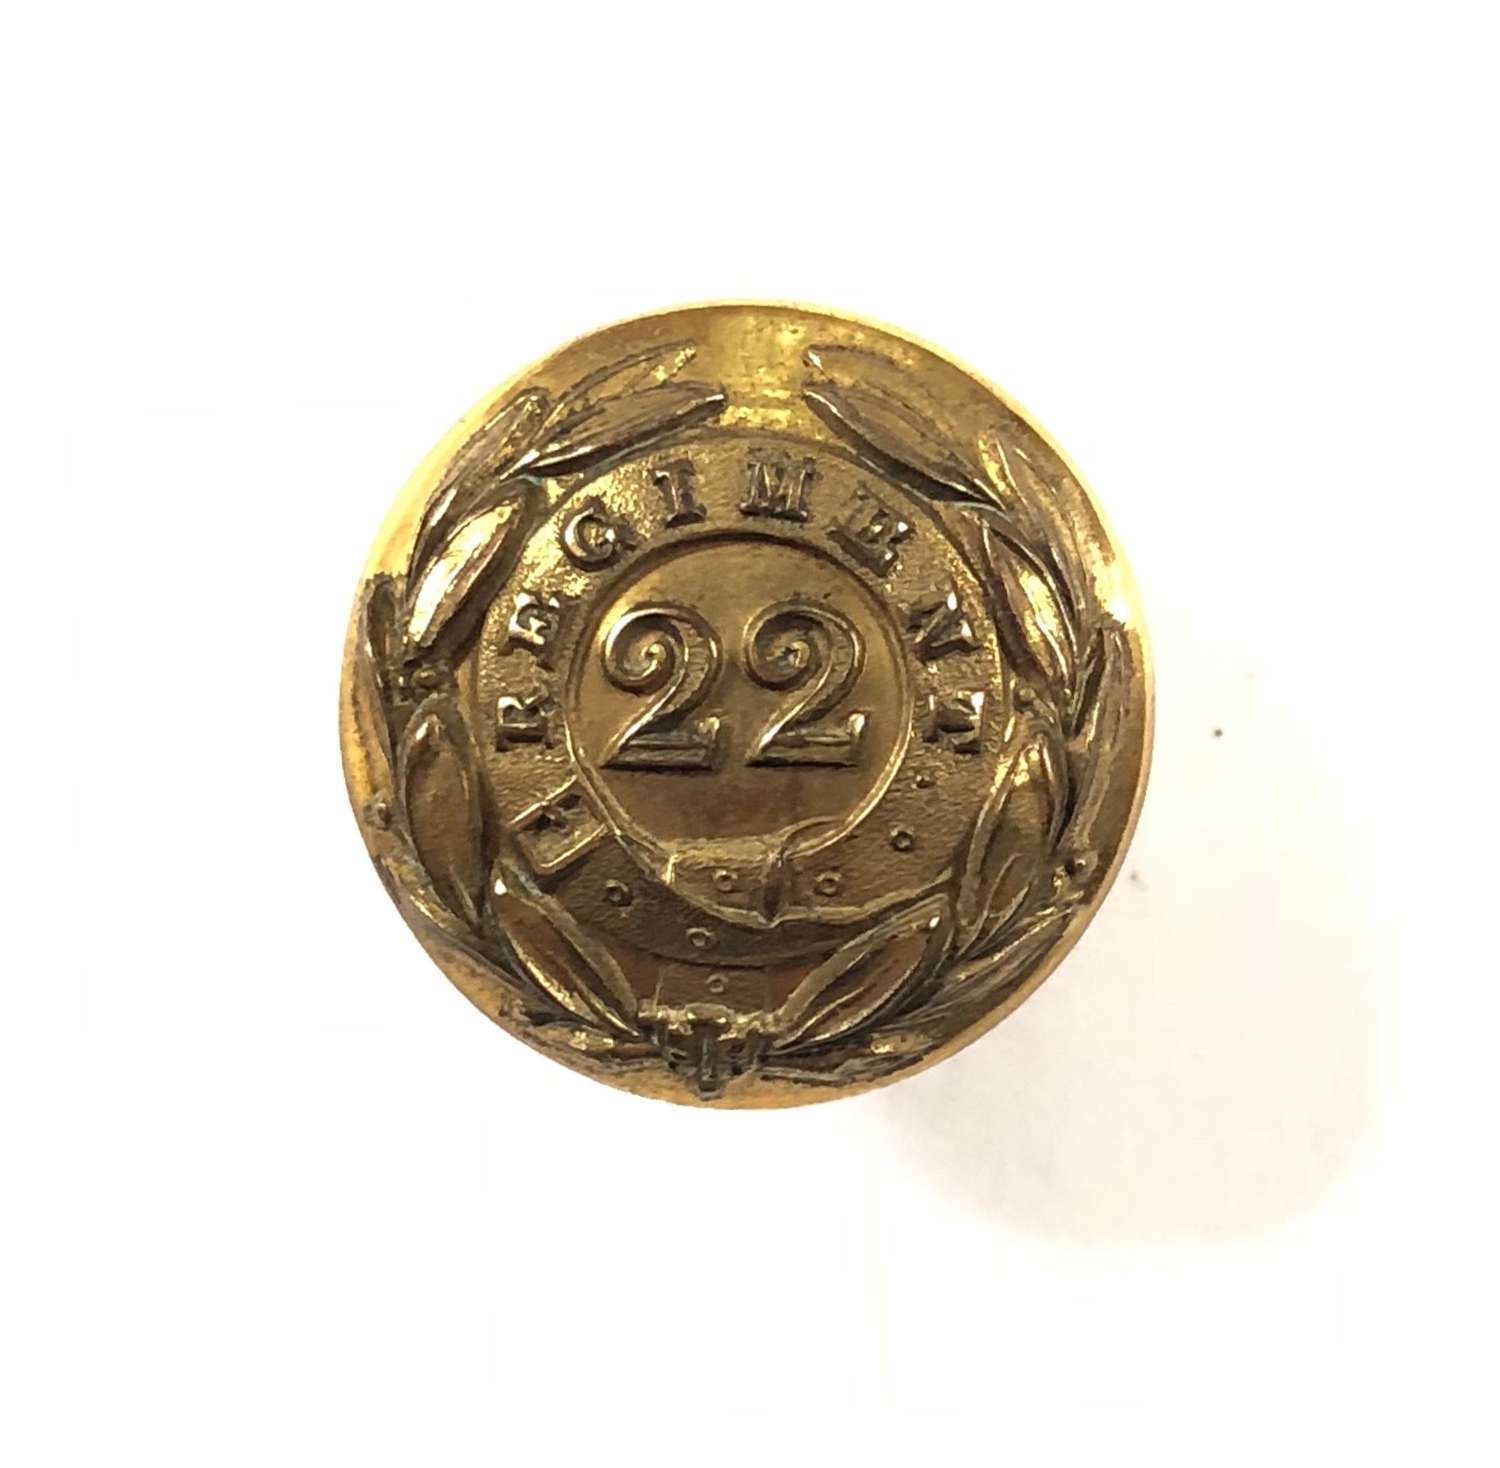 Georgian Indian Army. 22nd Bengal Native Infantry Coatee Button.